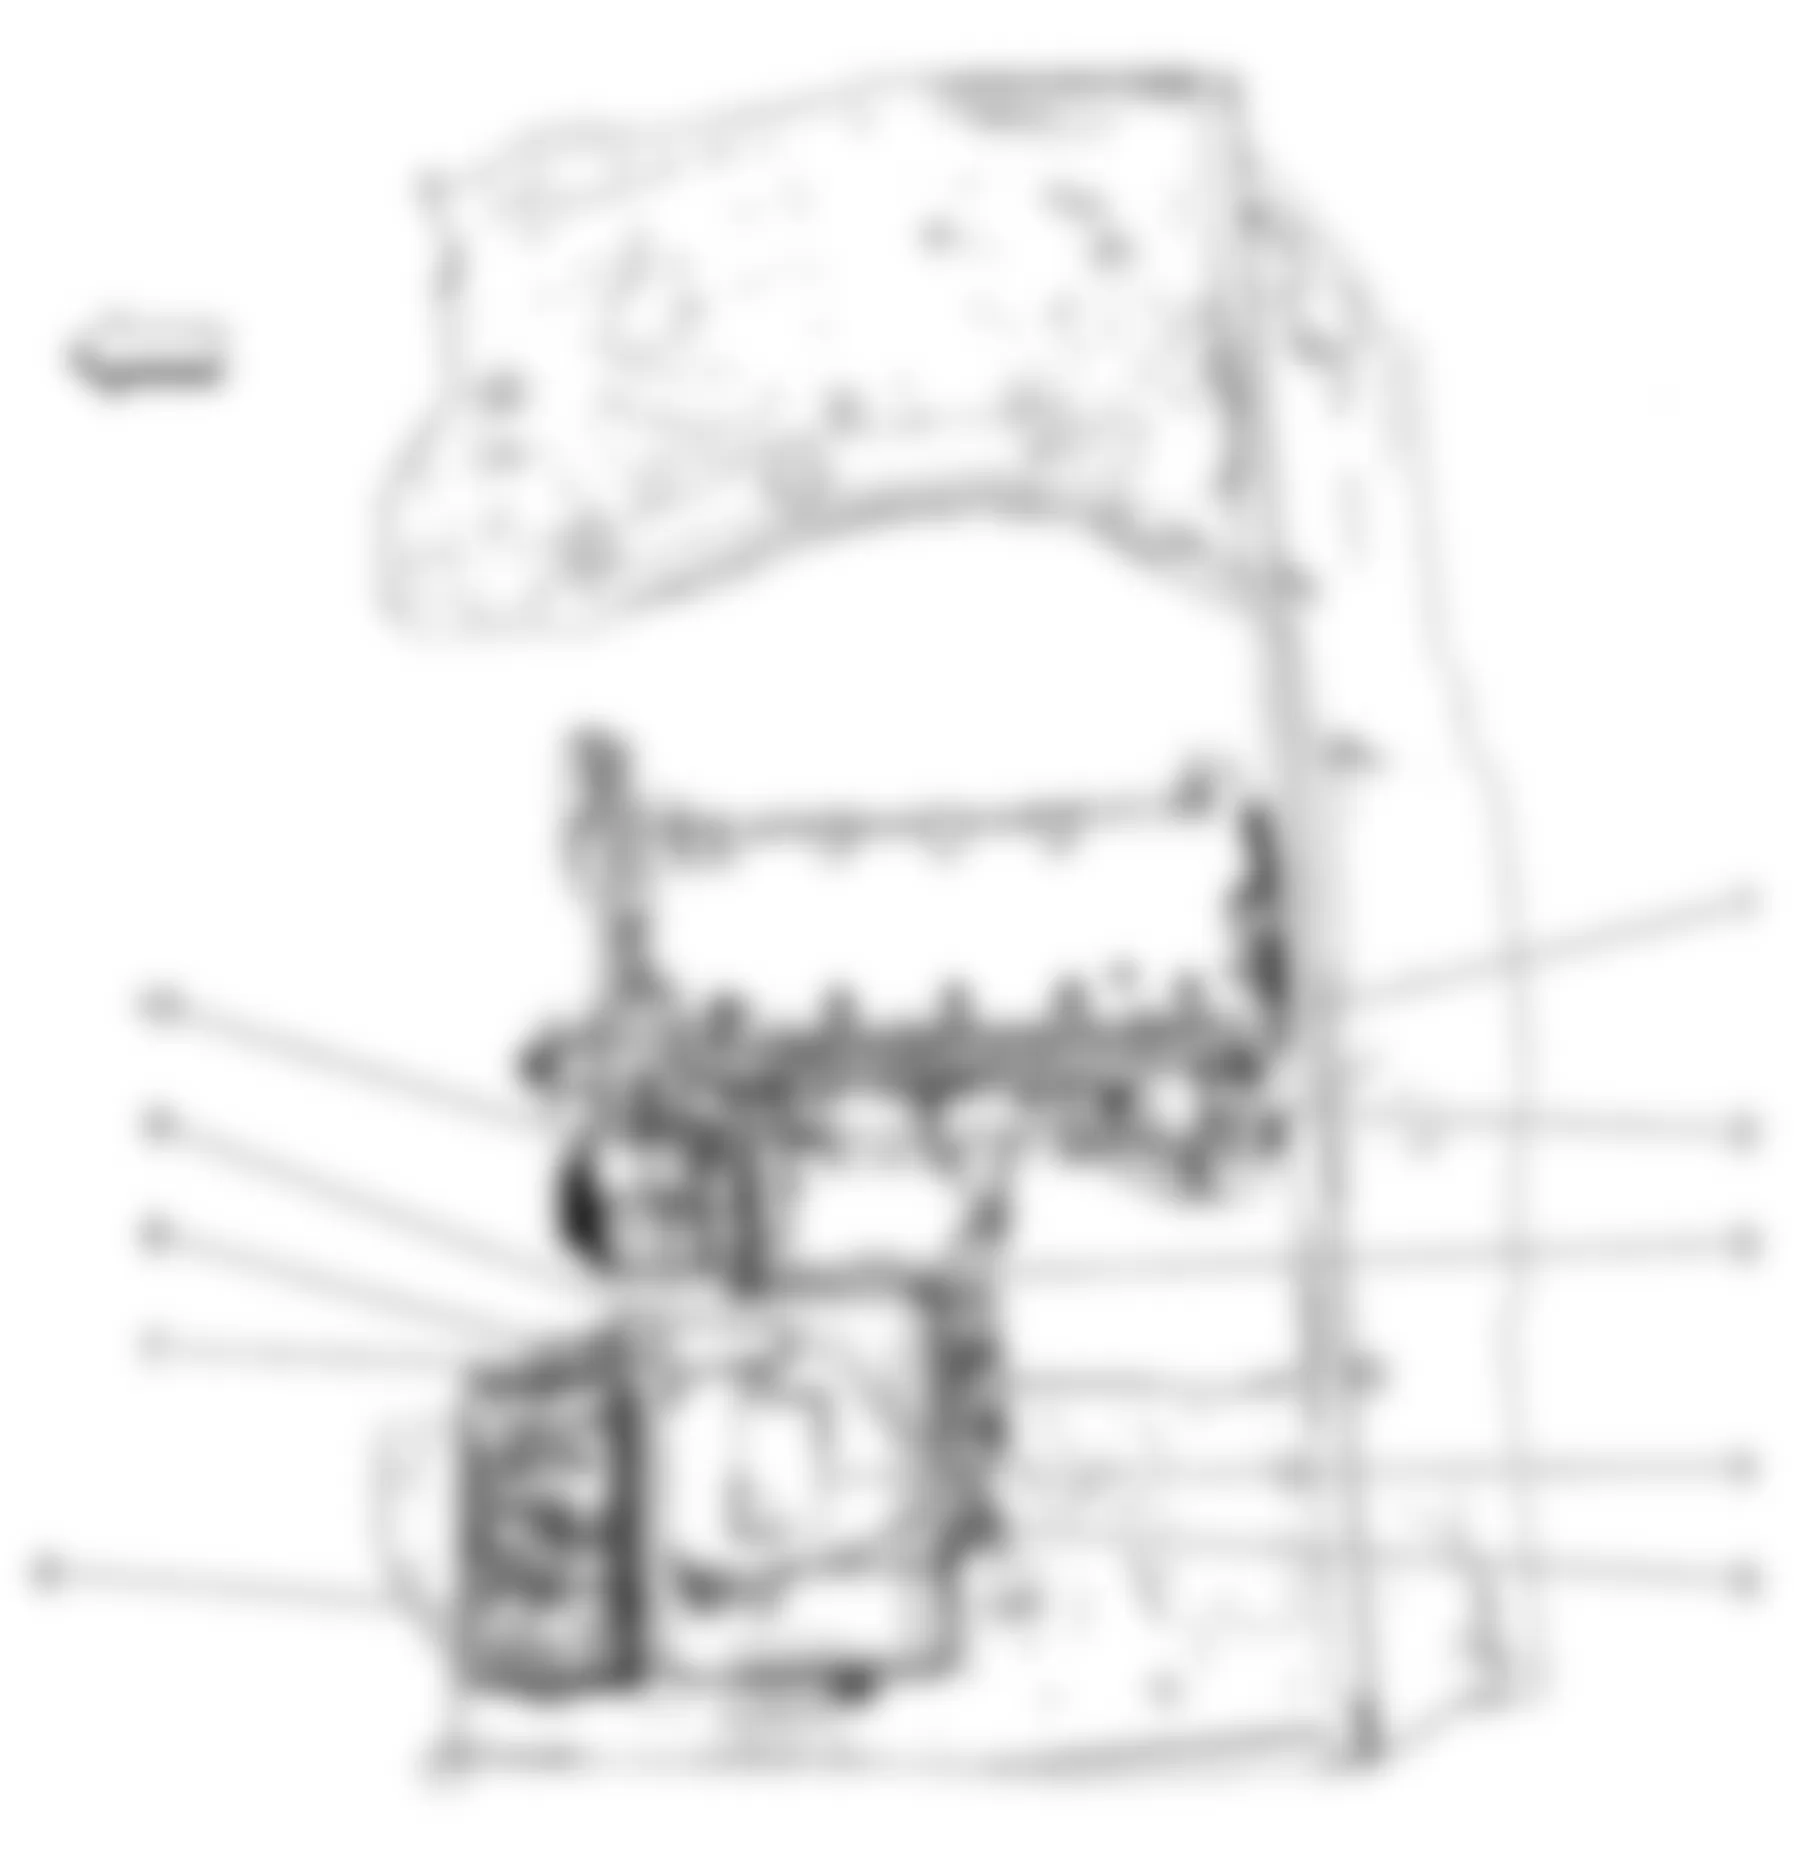 Isuzu i-290 S 2008 - Component Locations -  Engine Electrical Components